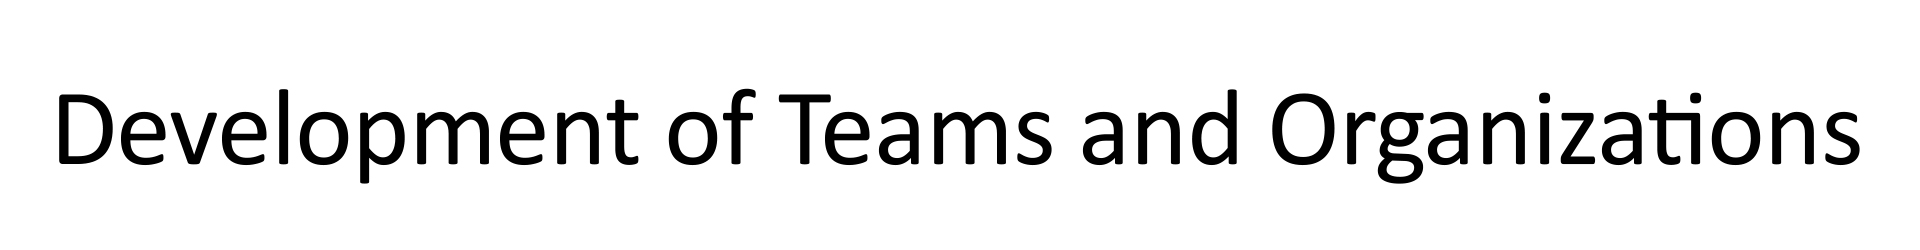 ENG_10_Development_of_Teams_and_Organizations